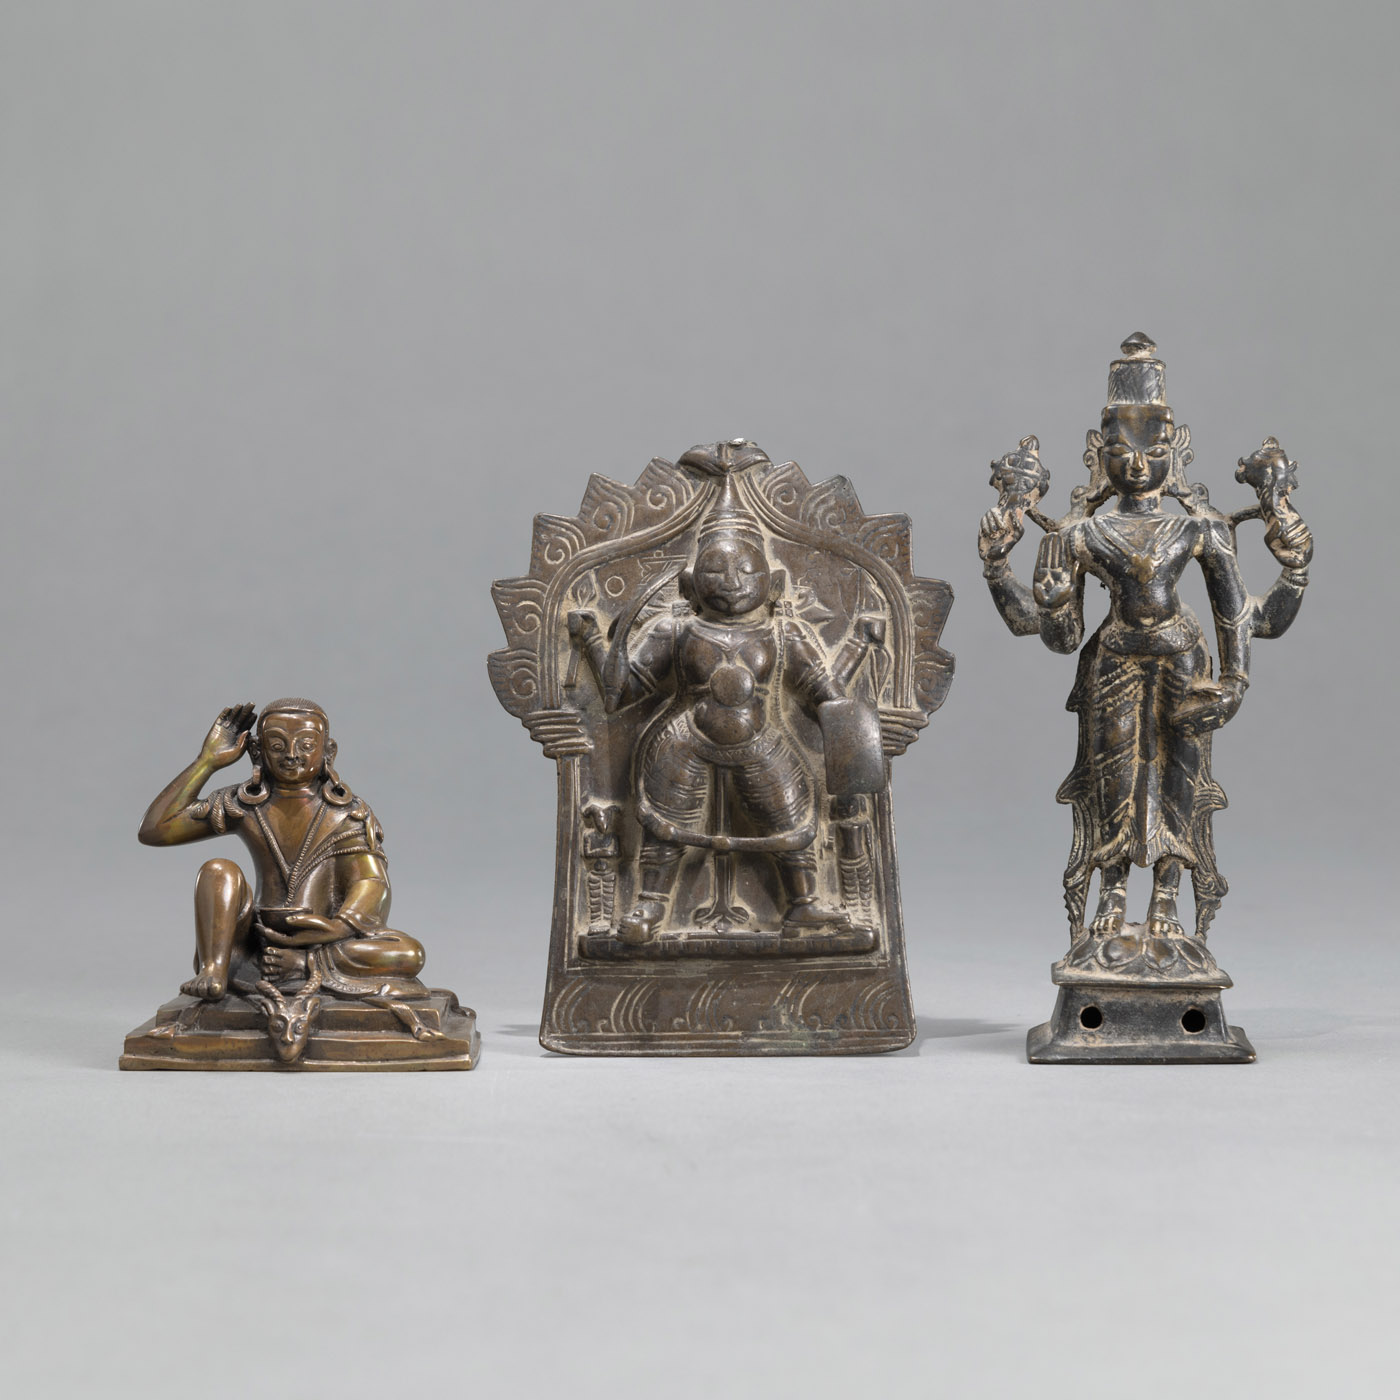 A GROUP OF BRONZES, INCLUDING A FIGURE OF MILAREPA